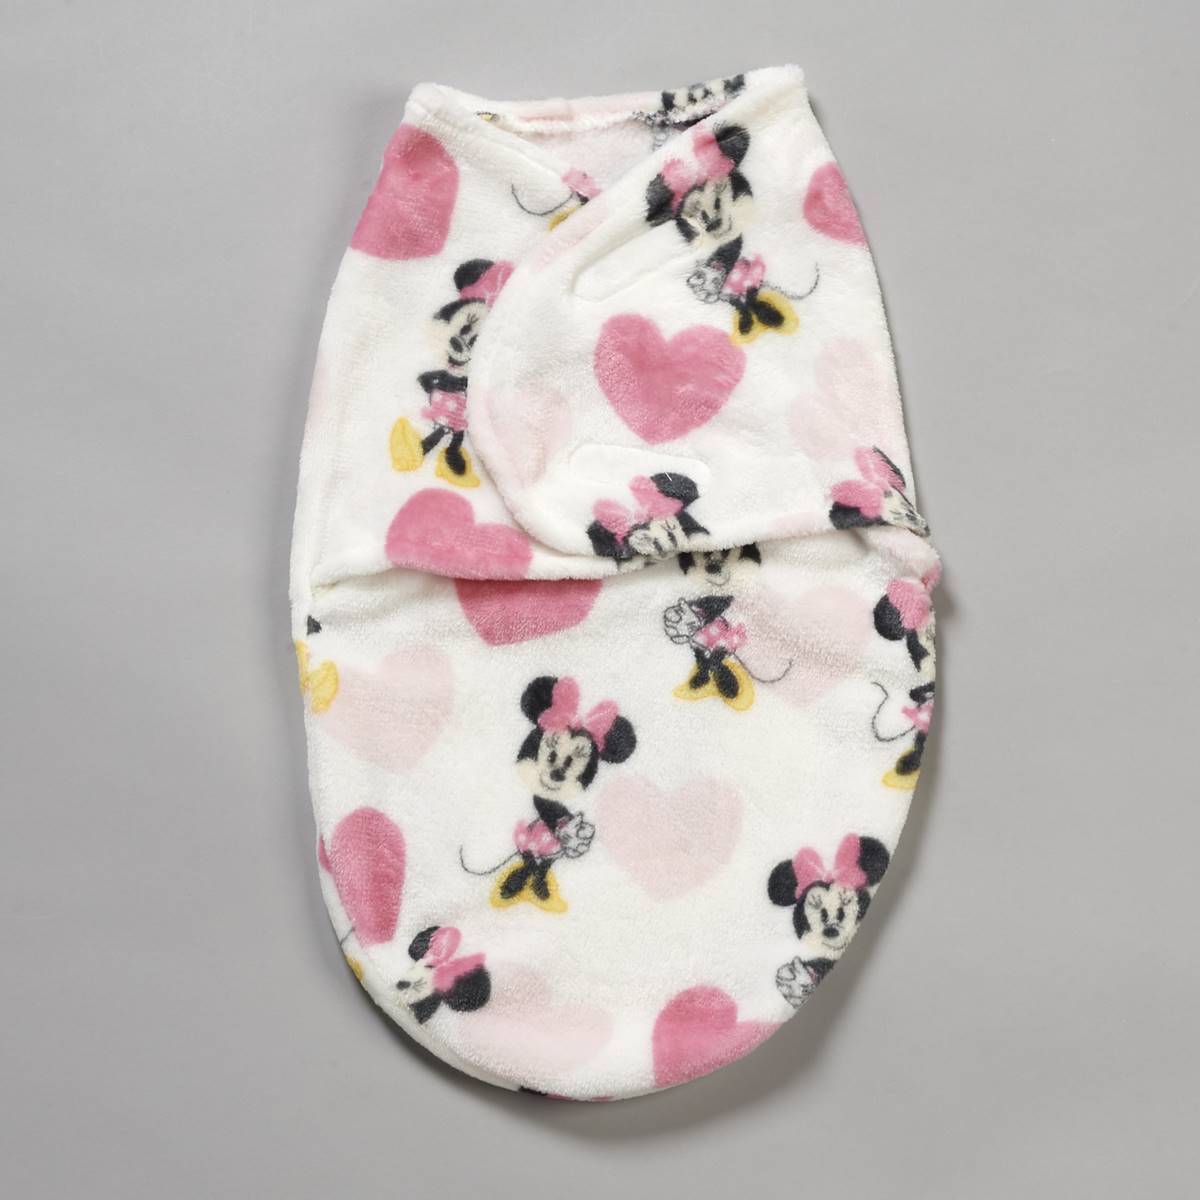 Disney Minnie Mouse Hearts Swaddle Blanket